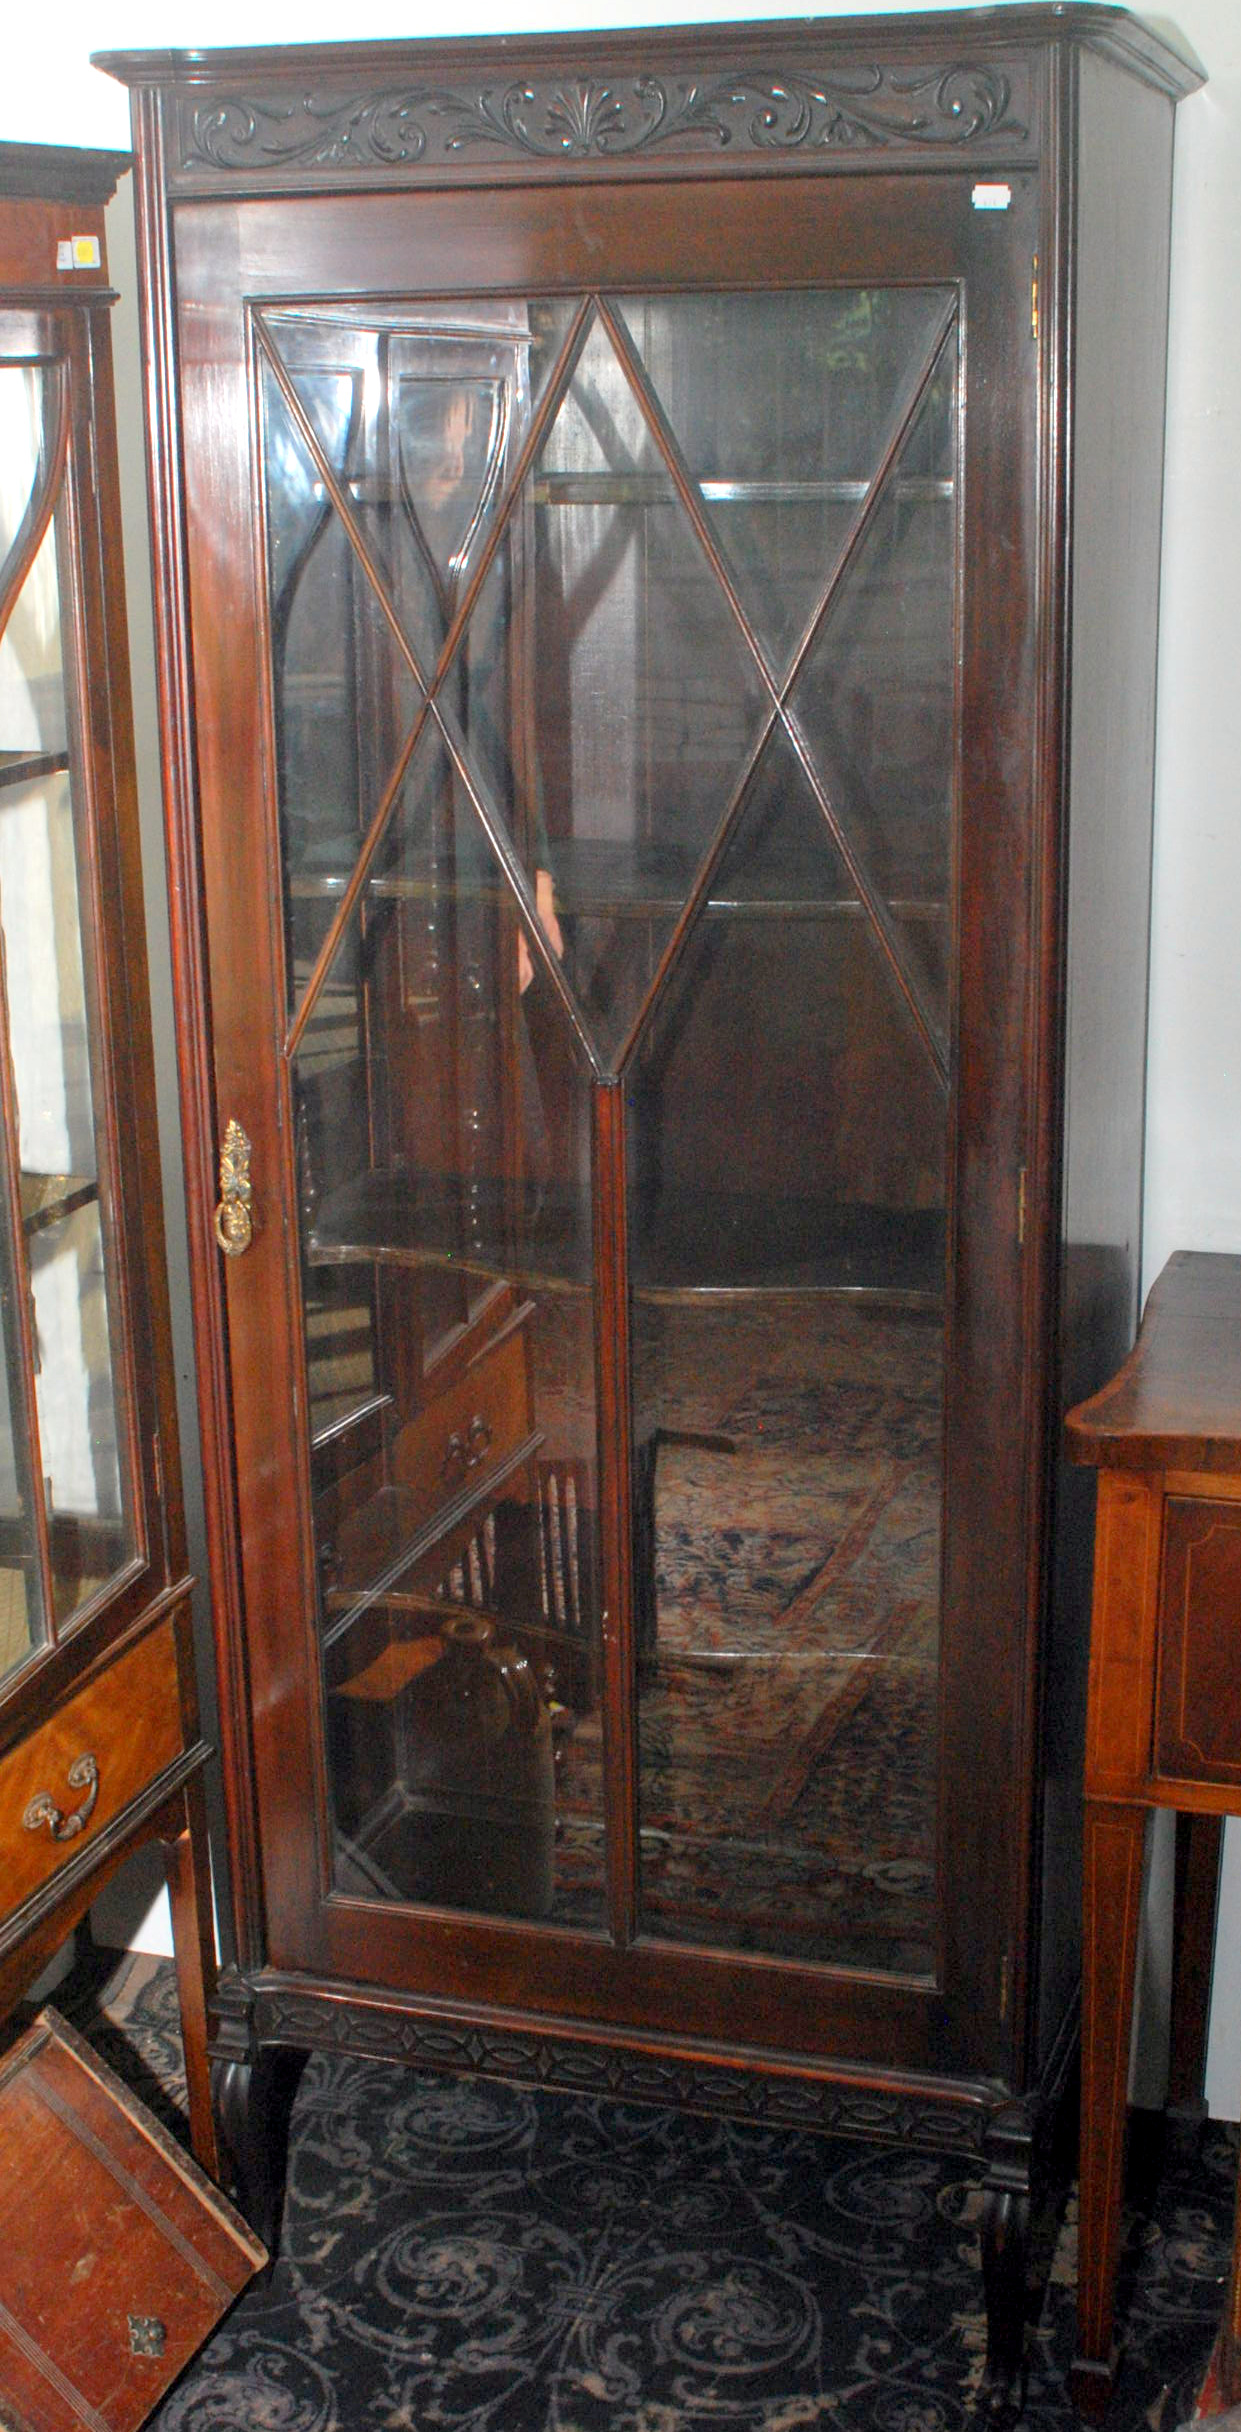 A late Victorian mahogany display cabinet with carved decoration and serpentine shelves on